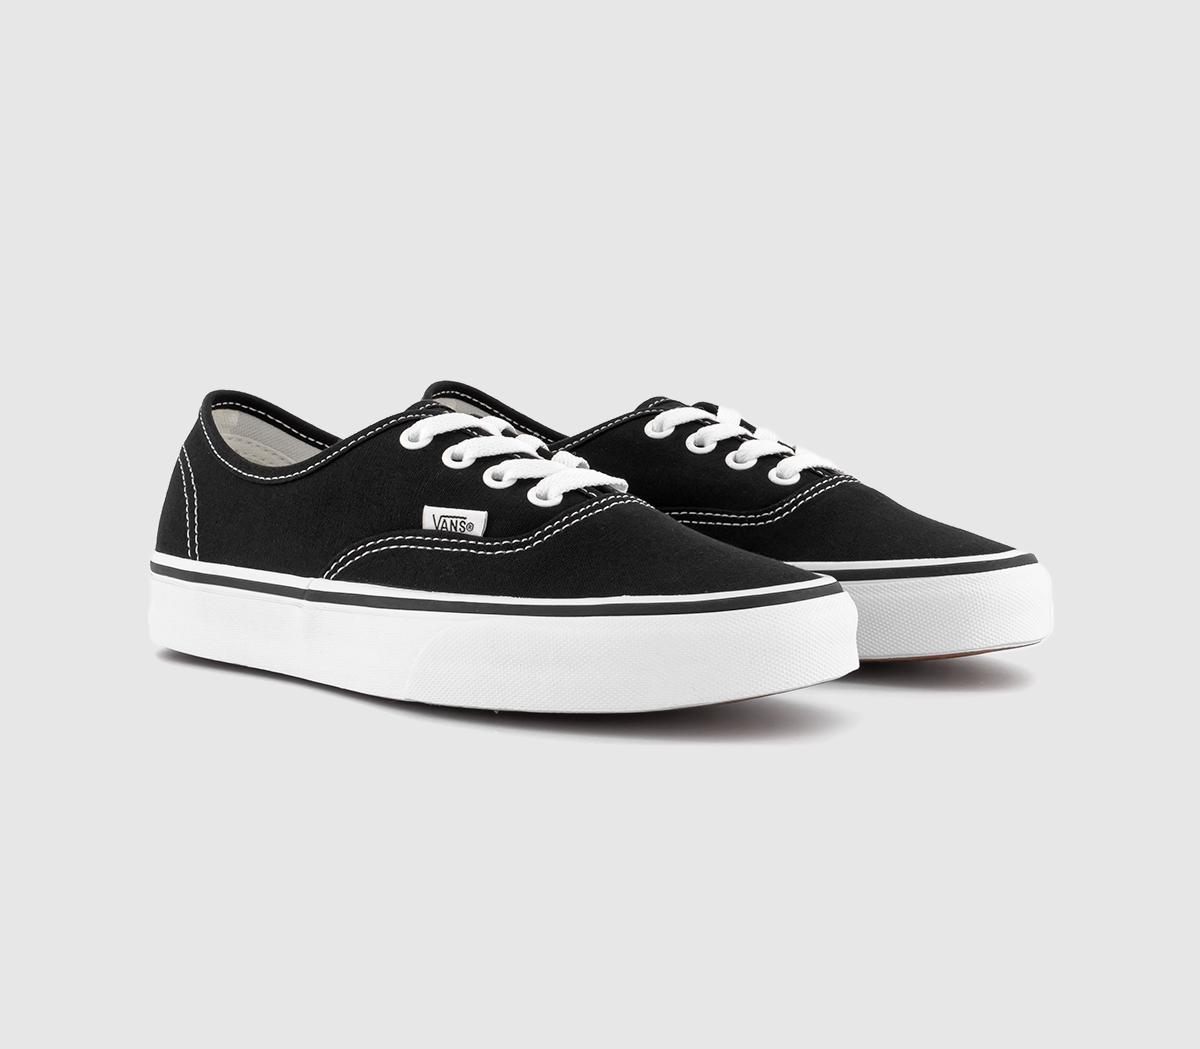 Vans Mens Authentic Trainers In Black And White, 9